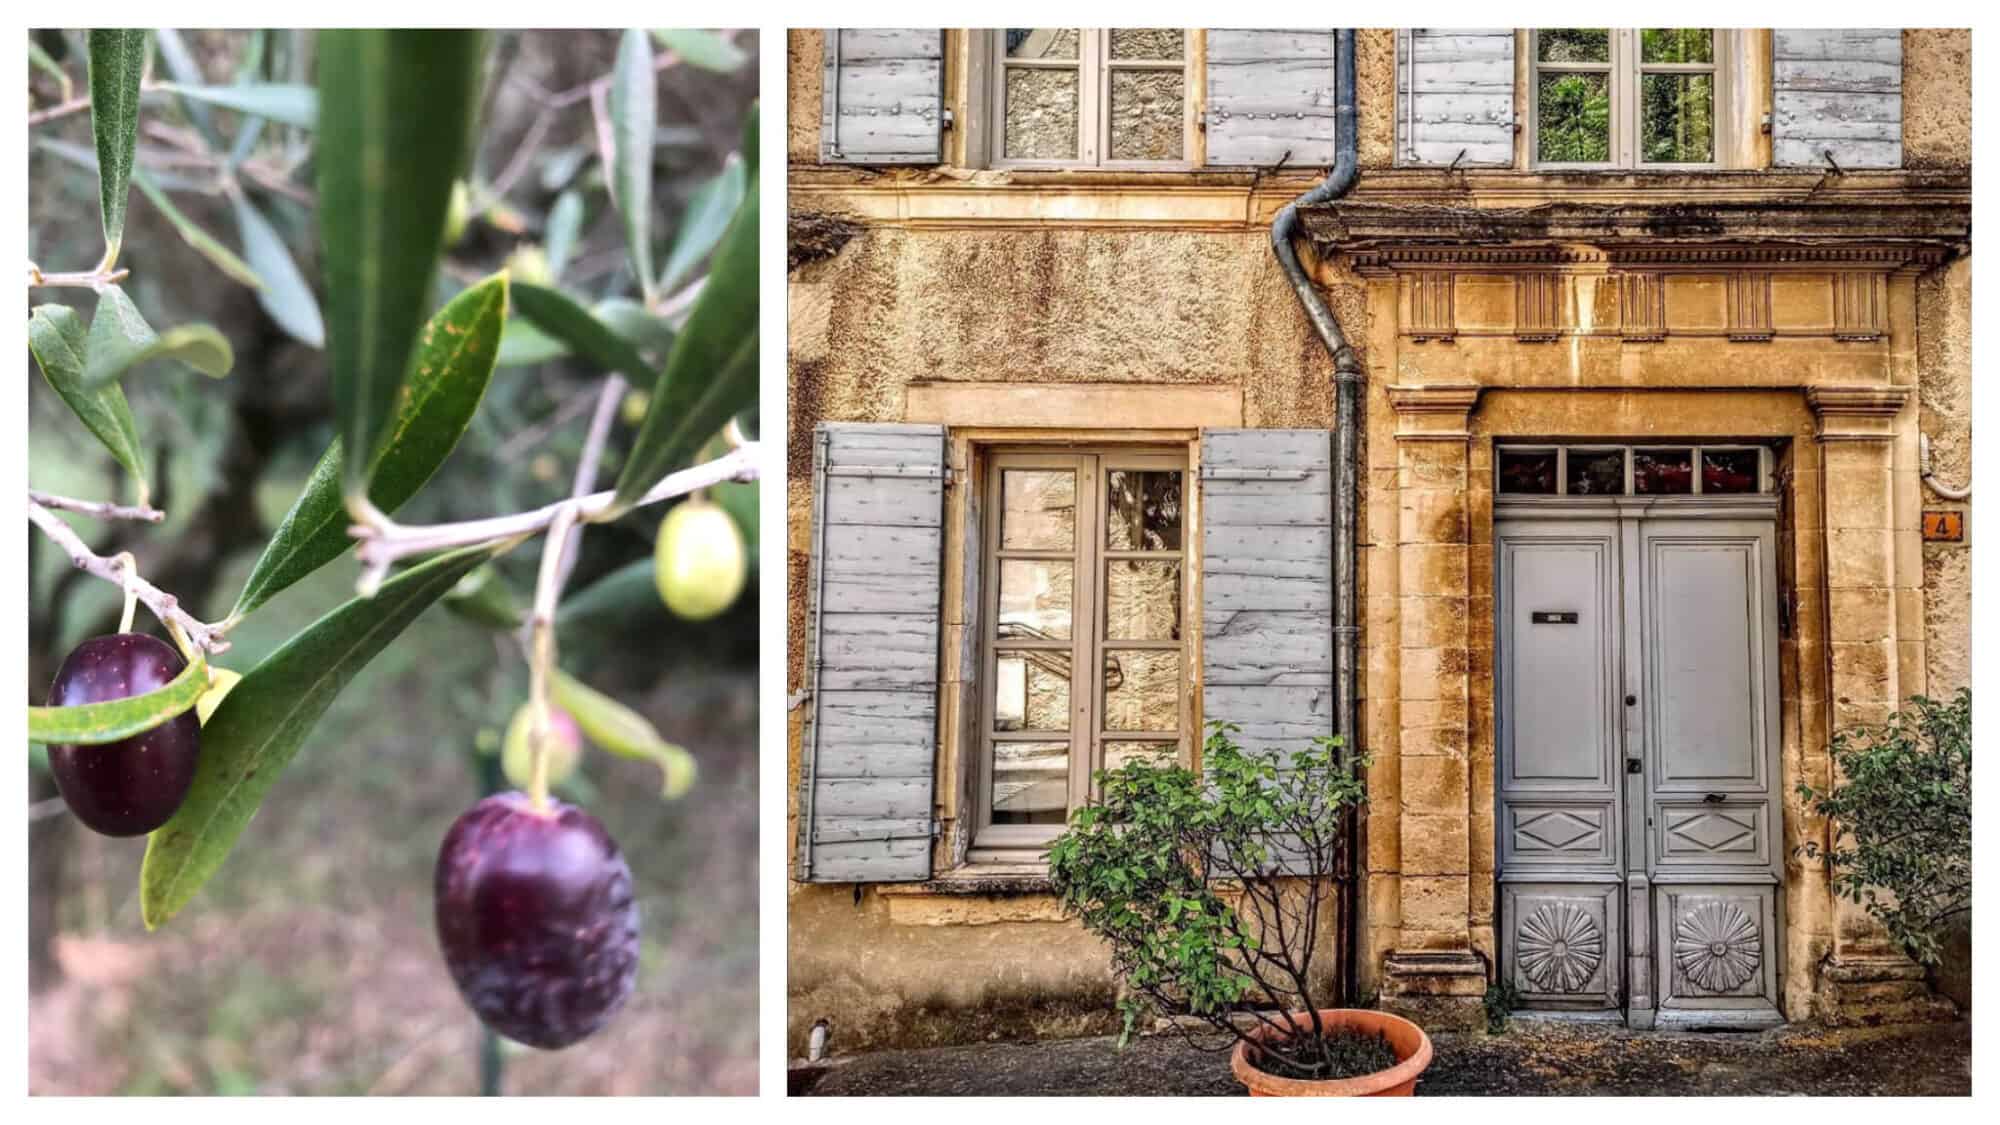 Left: a close up of olives on an olive tree. Right: the facade of a house in Vaison-la-Romaine.